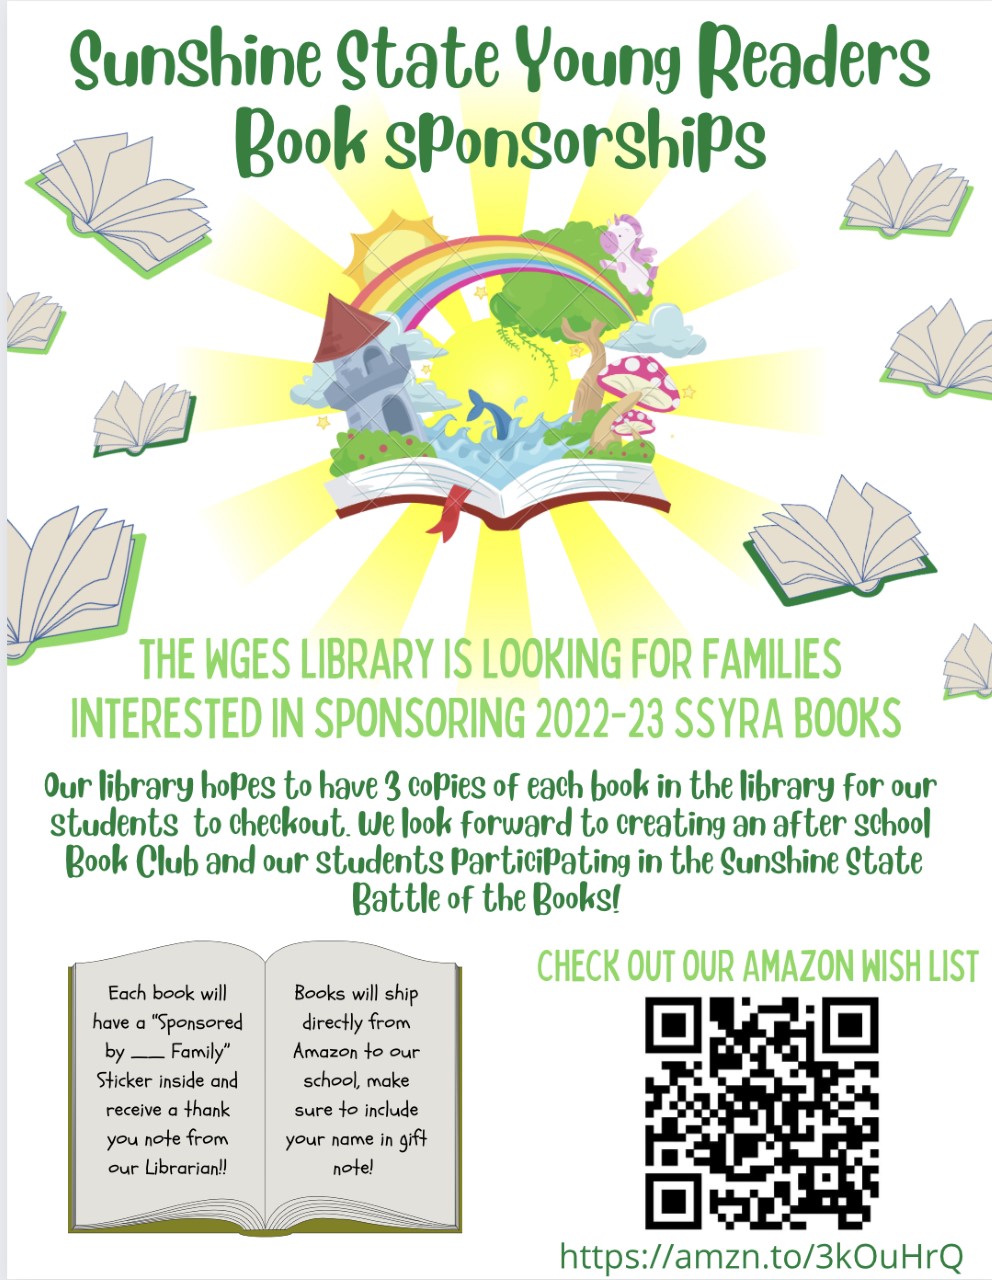 Would You Like to Sponsor a Sunshine State Young Readers Award Book for WGES?